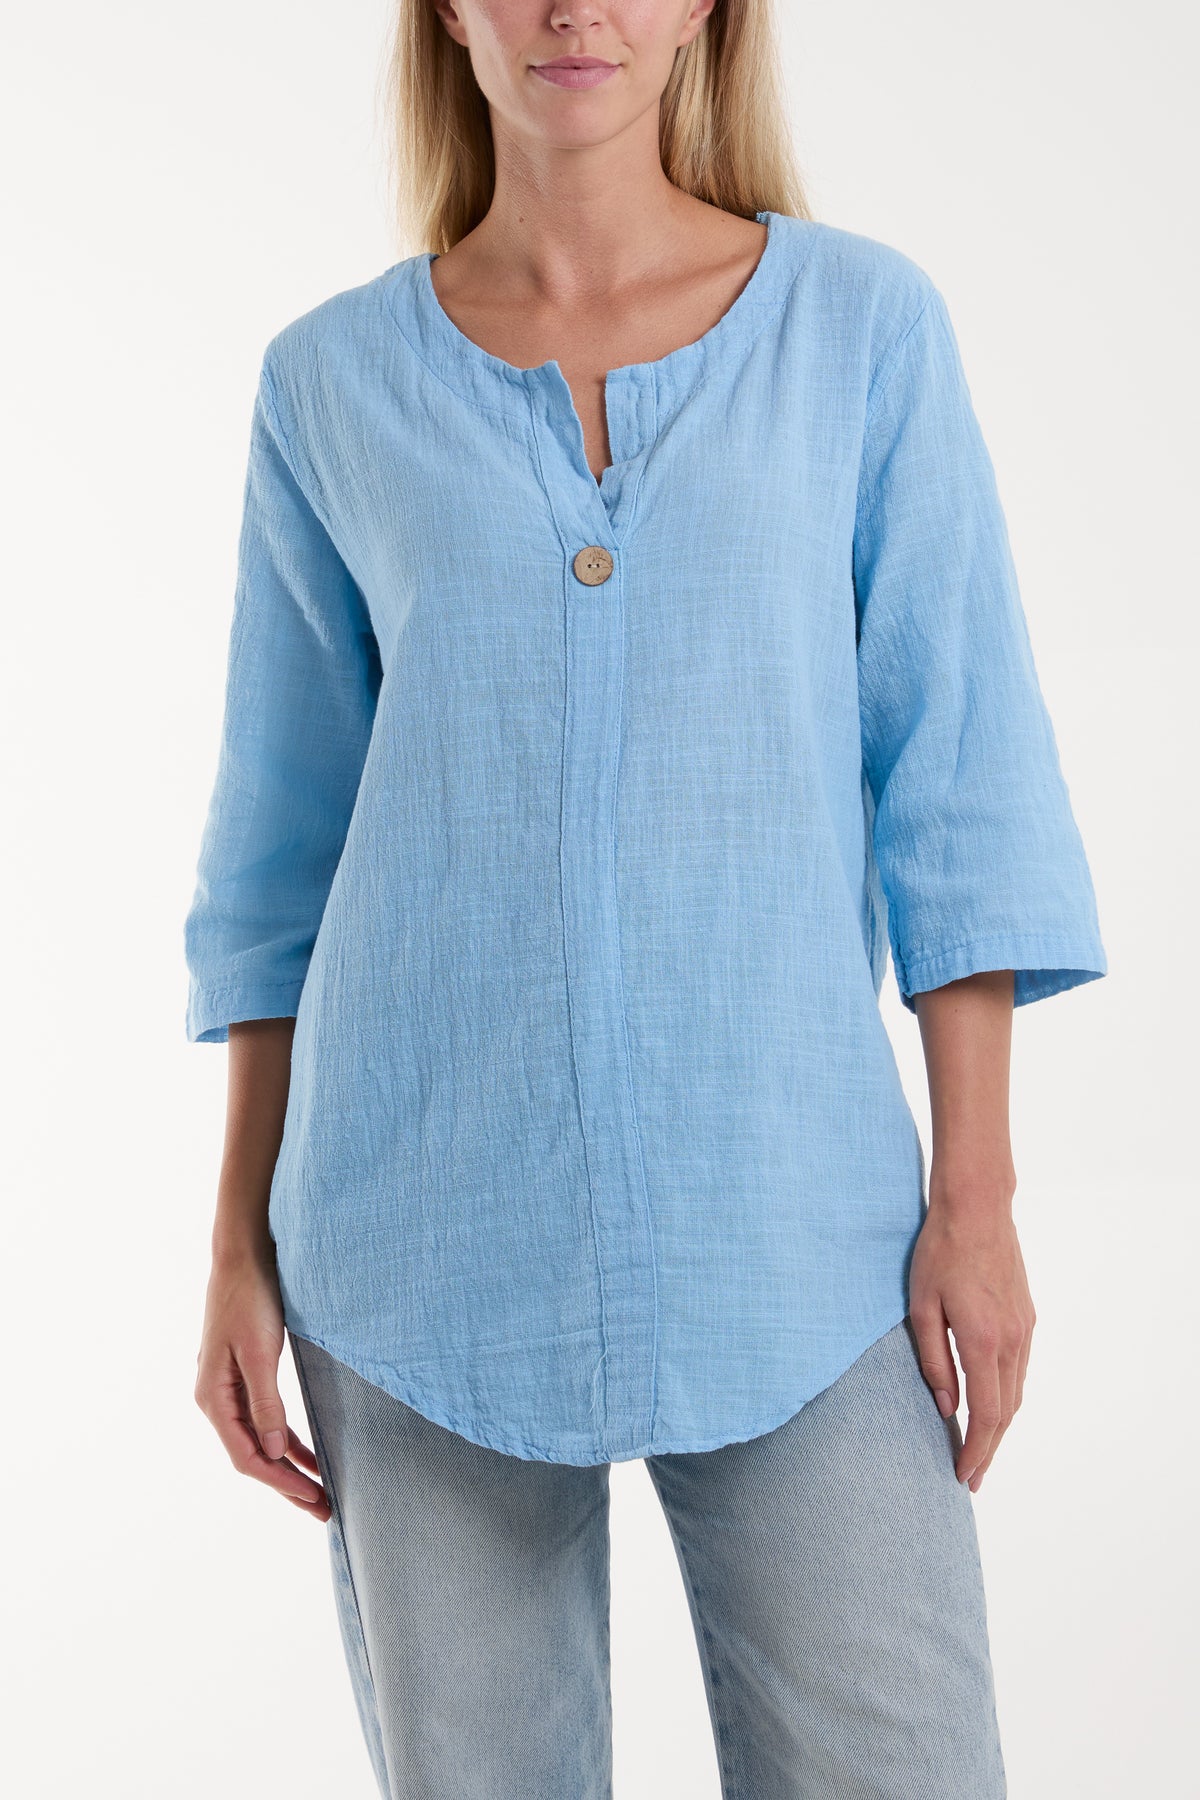 Front Button Cotton Washed Top